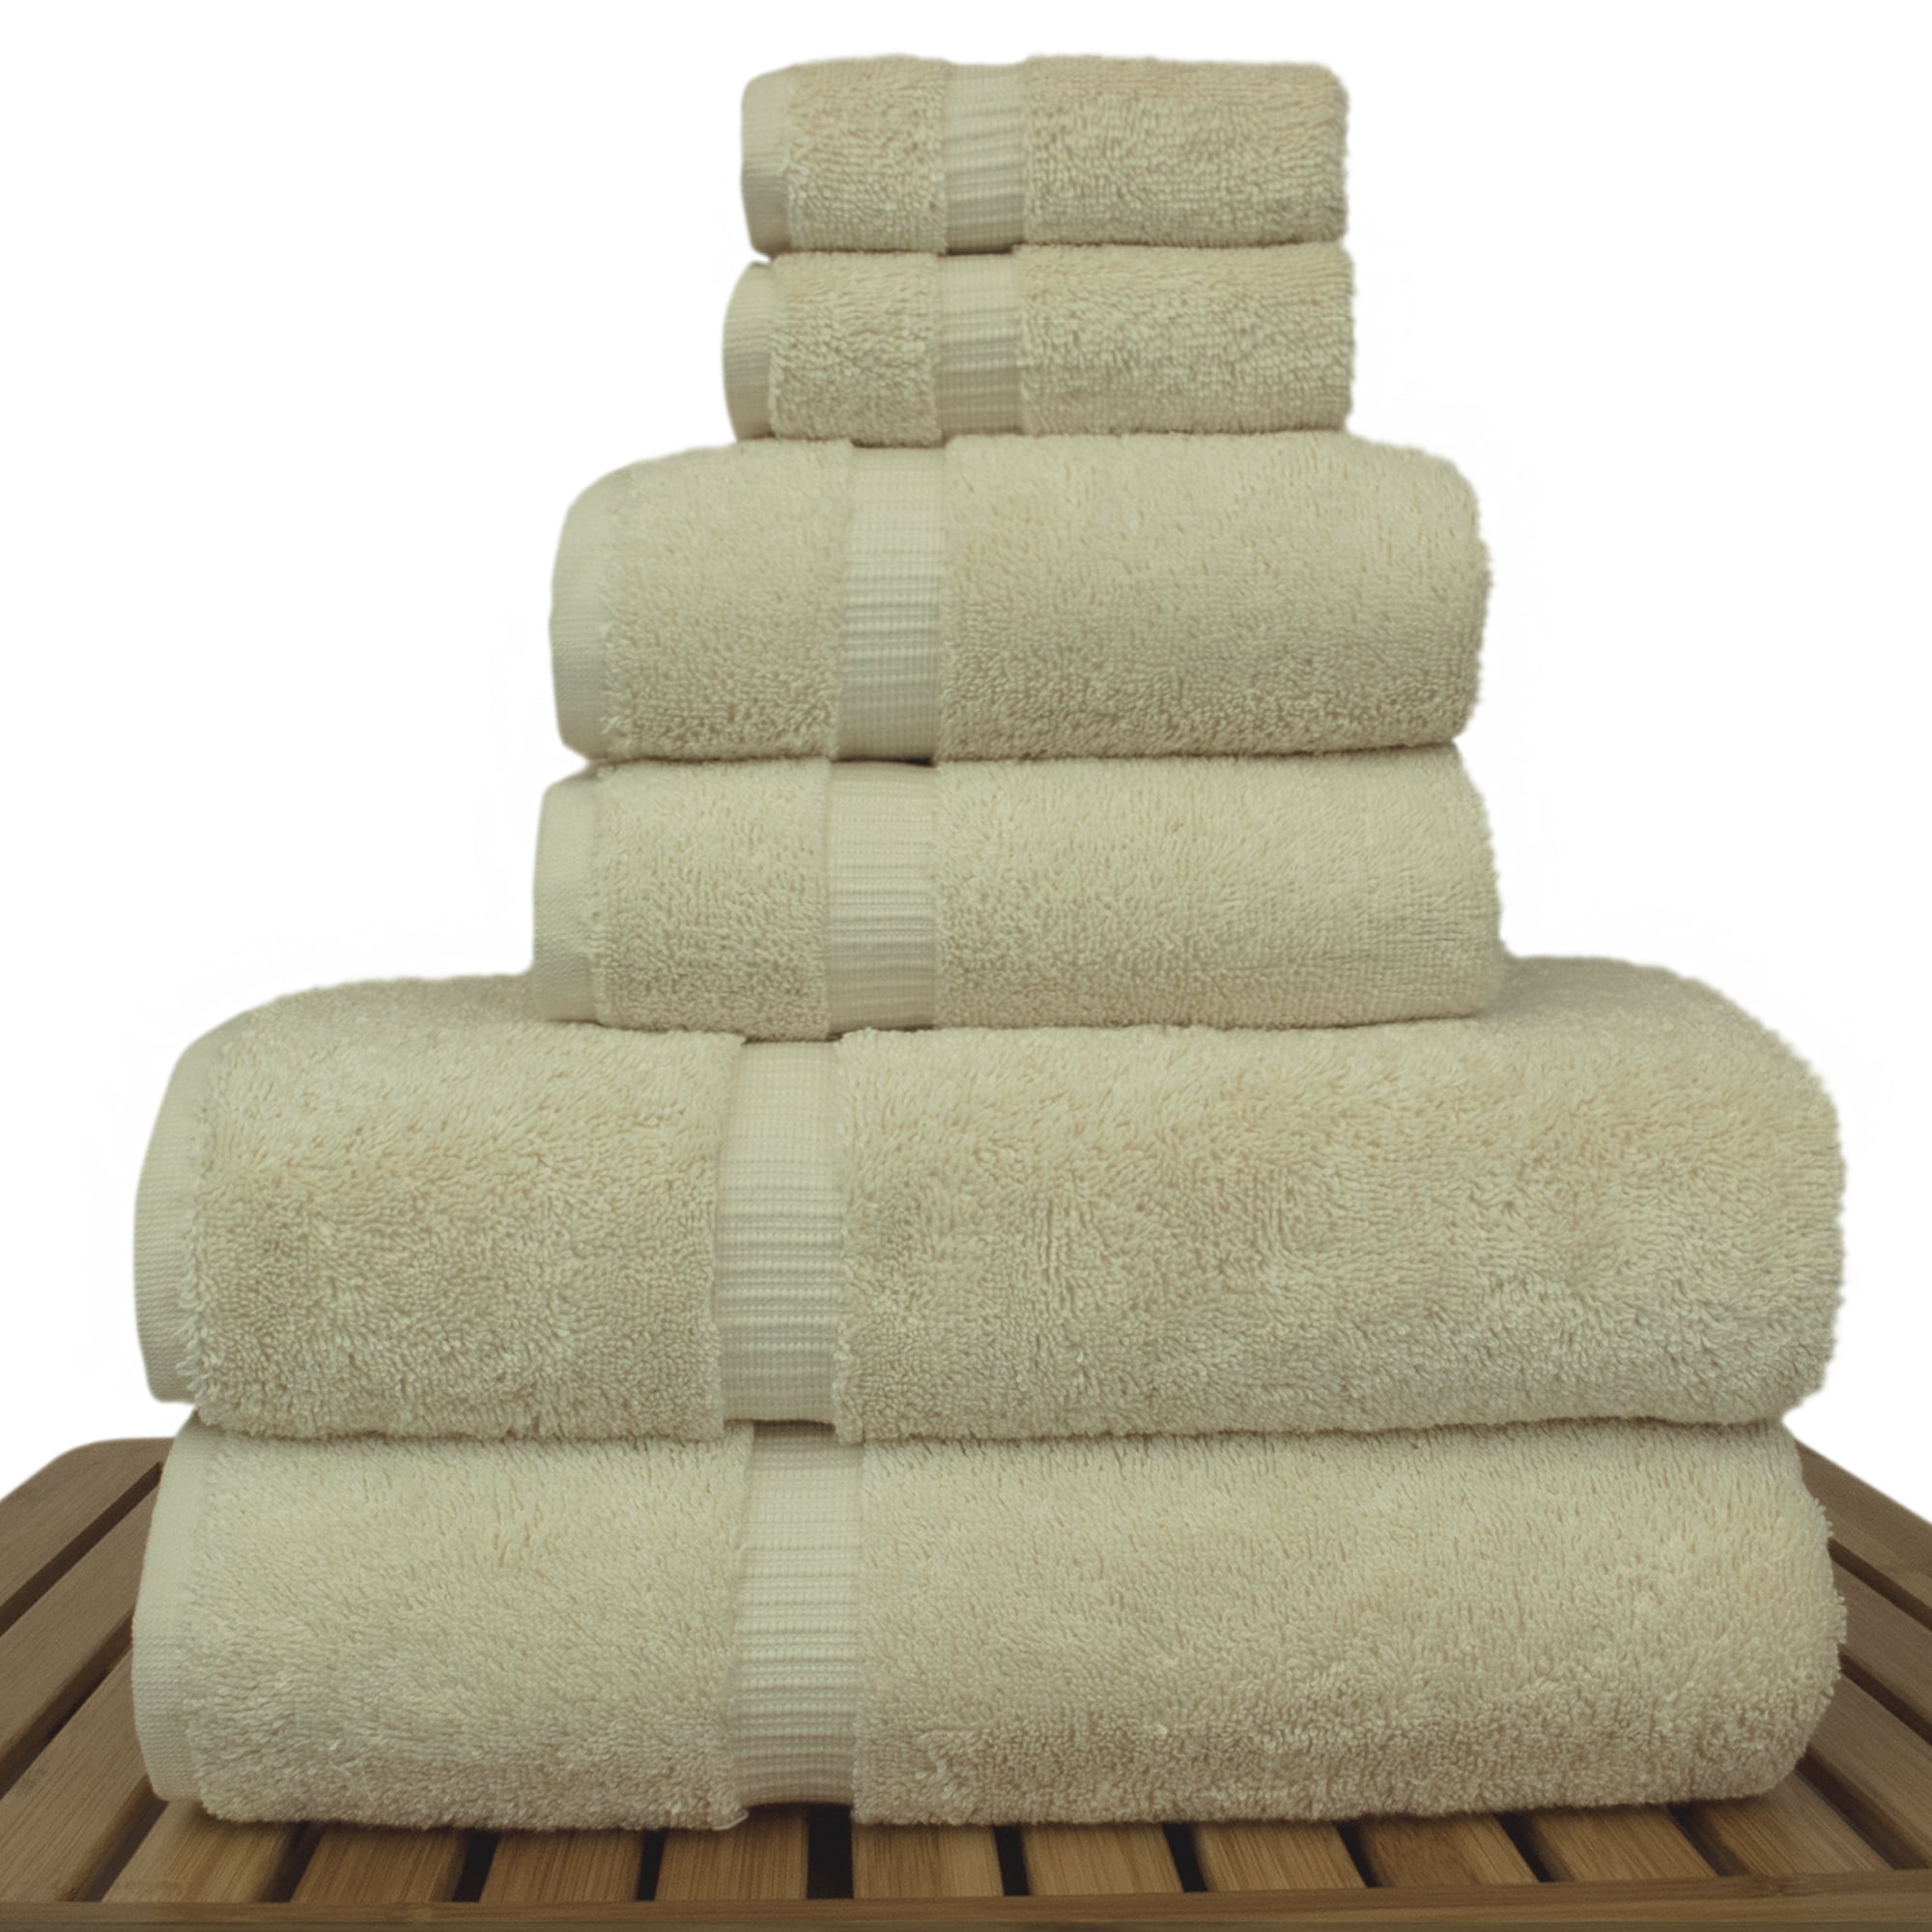 Homerican Oversized Bath Towels Extra Large - Fluffy & Soft Oversized Turkish  Bath Sheet - Quick Dry, Absorbent & Machine-Washable Cotton Towels for  Bathroom, Hotel or Spa - 40x80, 600 GSM Terracotta